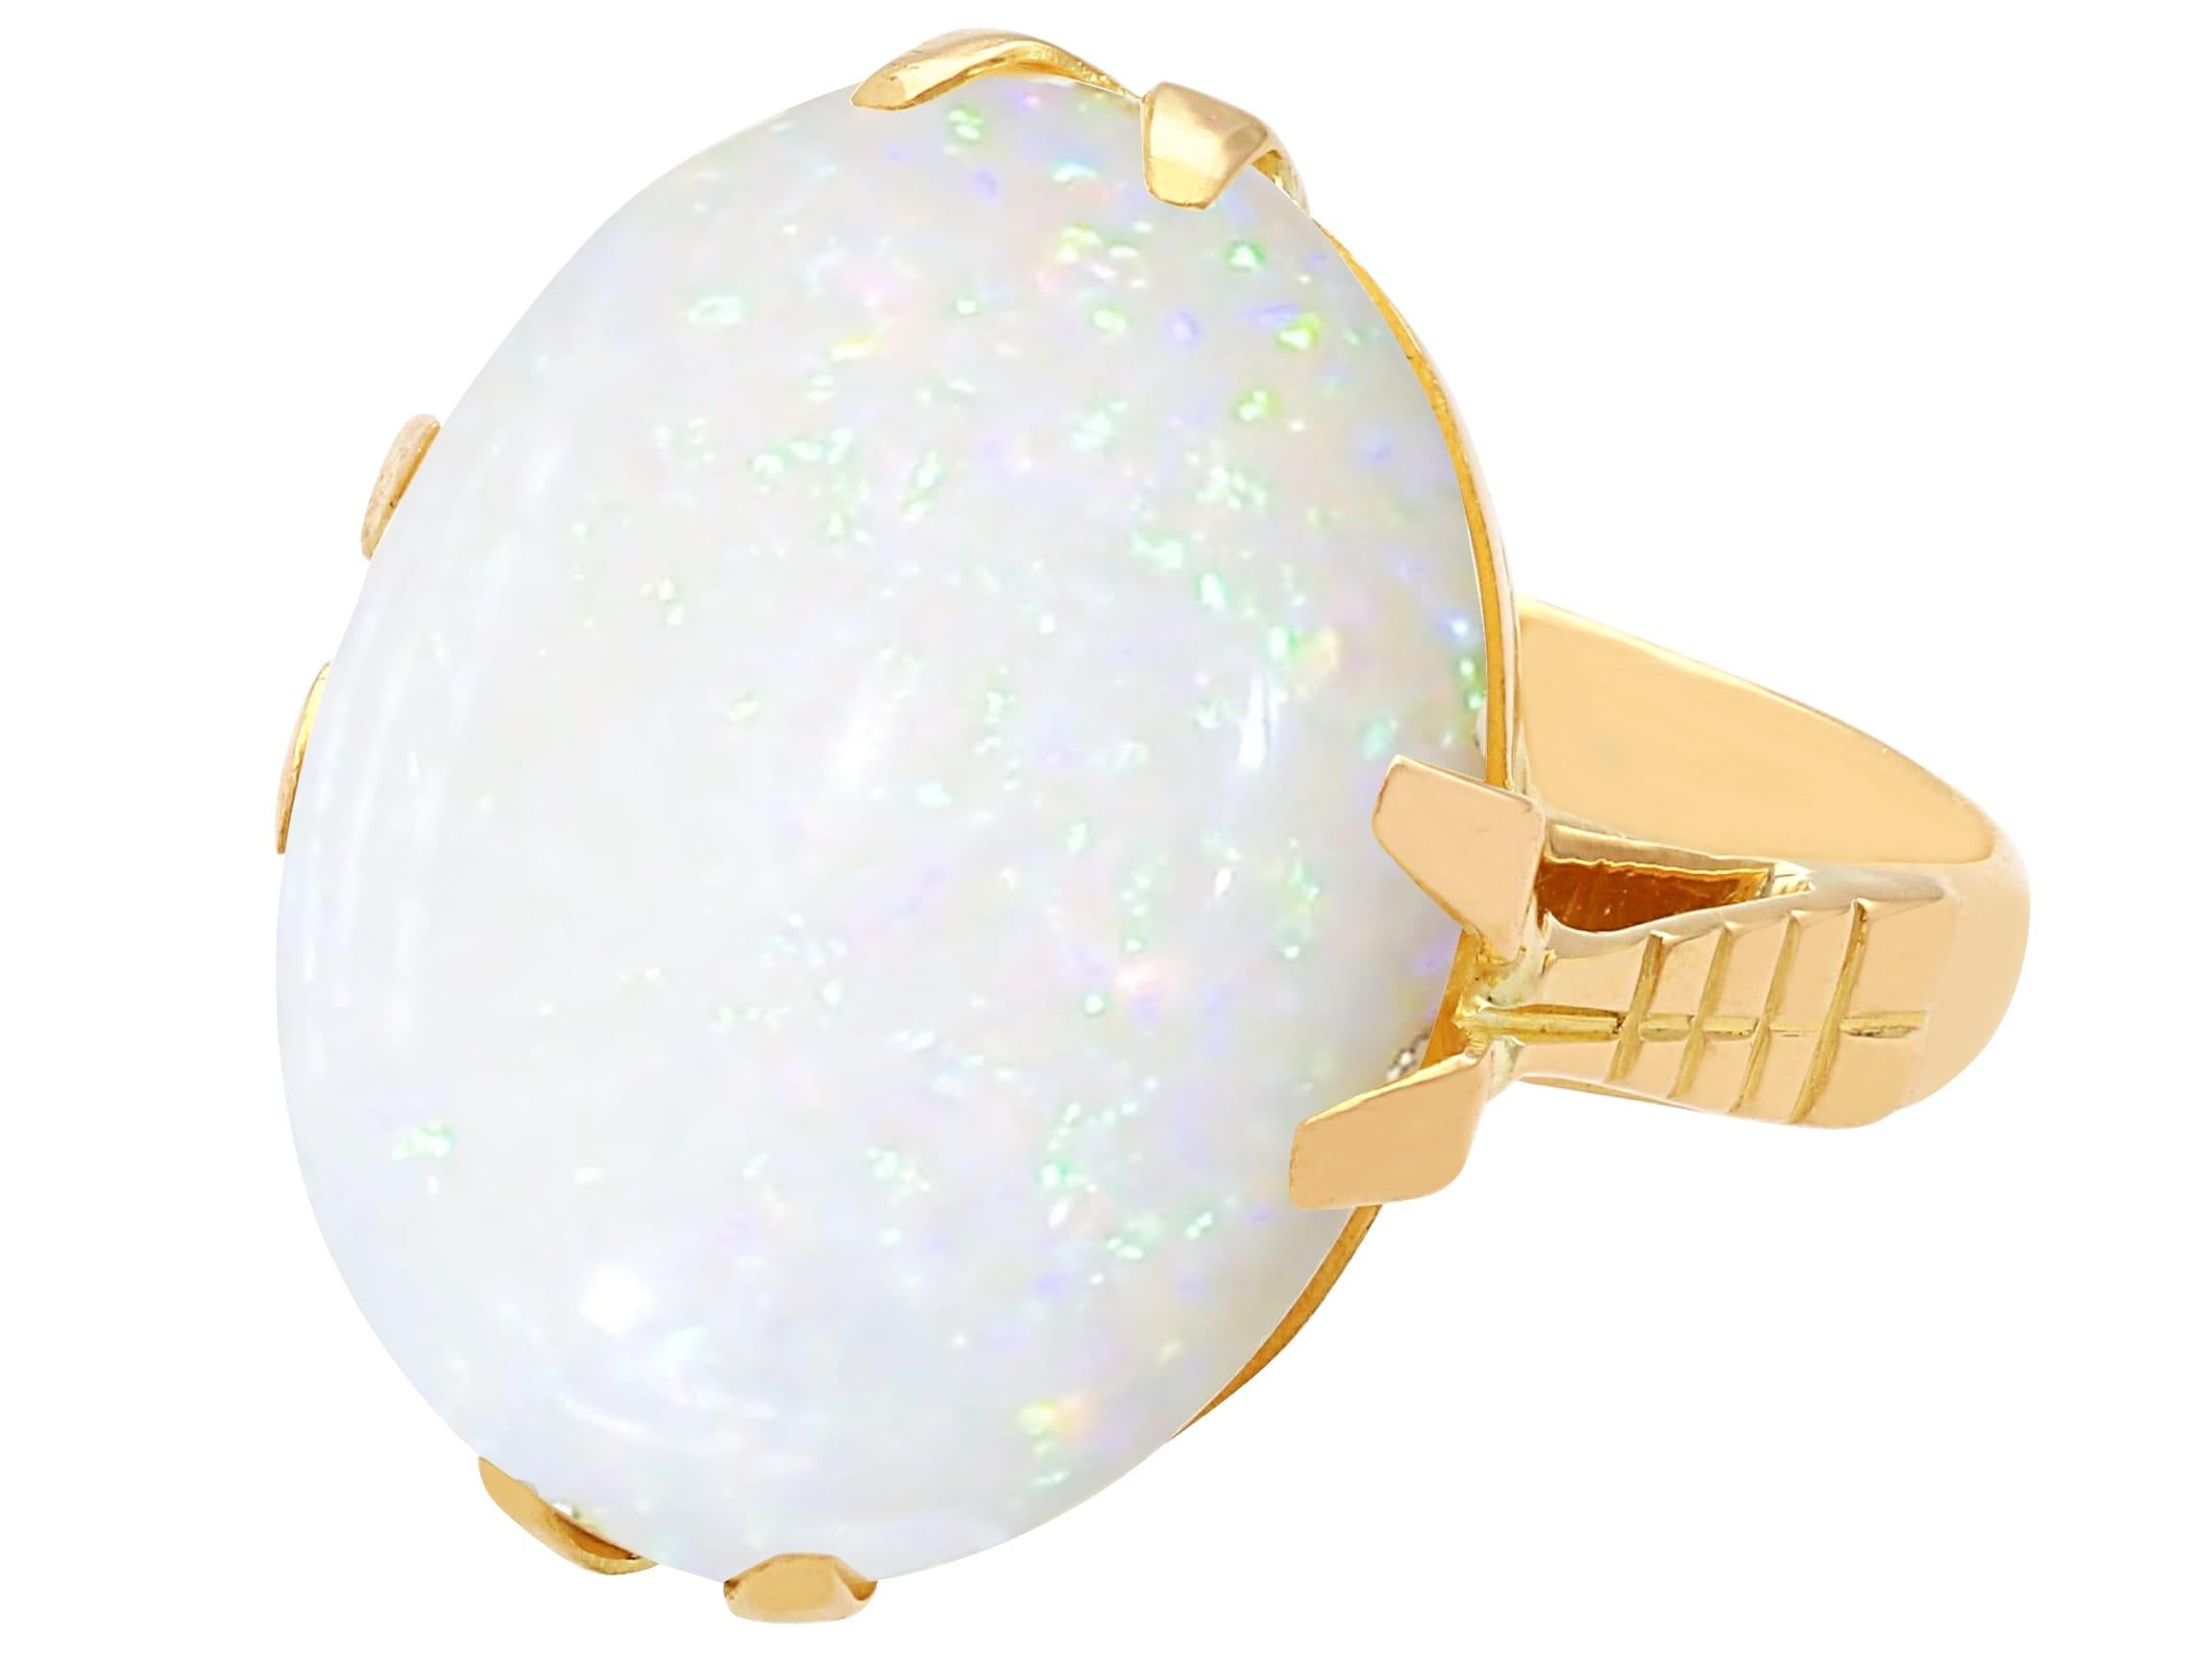 Cabochon Vintage 13.50 Carat Opal and 20k Yellow Gold Ring For Sale